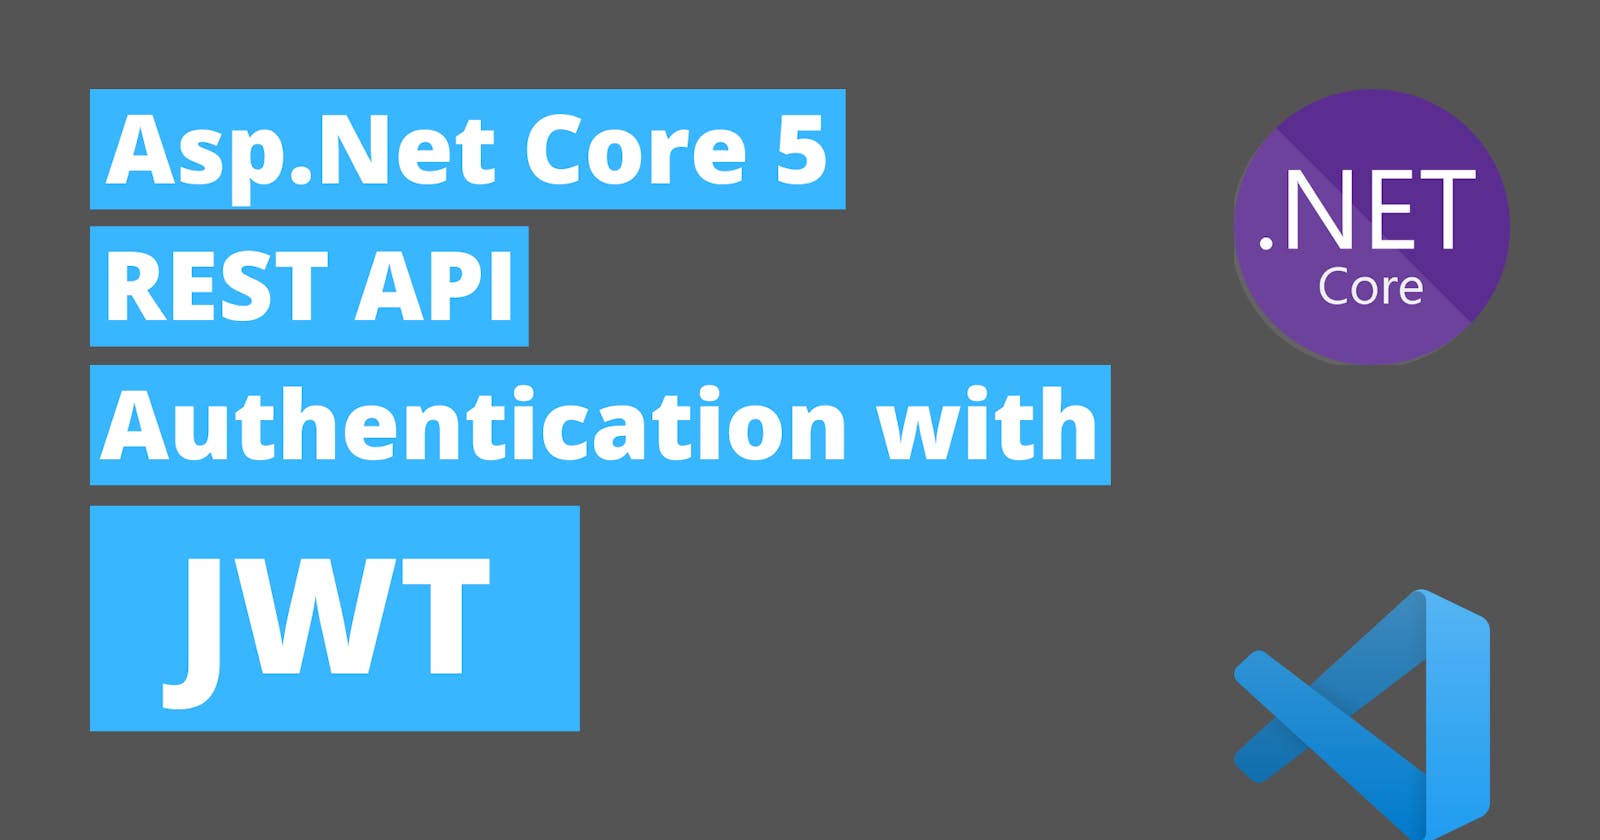 Asp Net Core 5 Rest API Authentication with JWT Step by Step